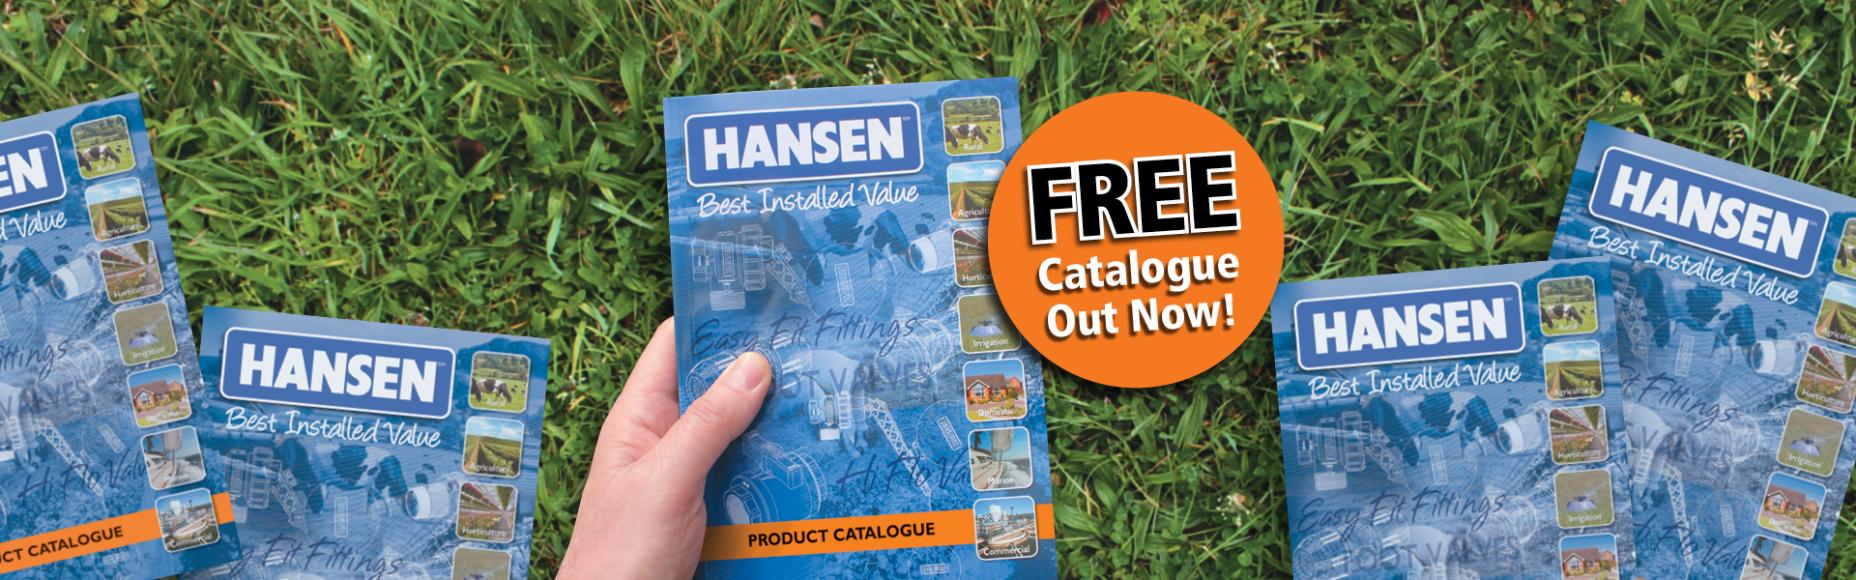 FREE Catalogue Out Now!